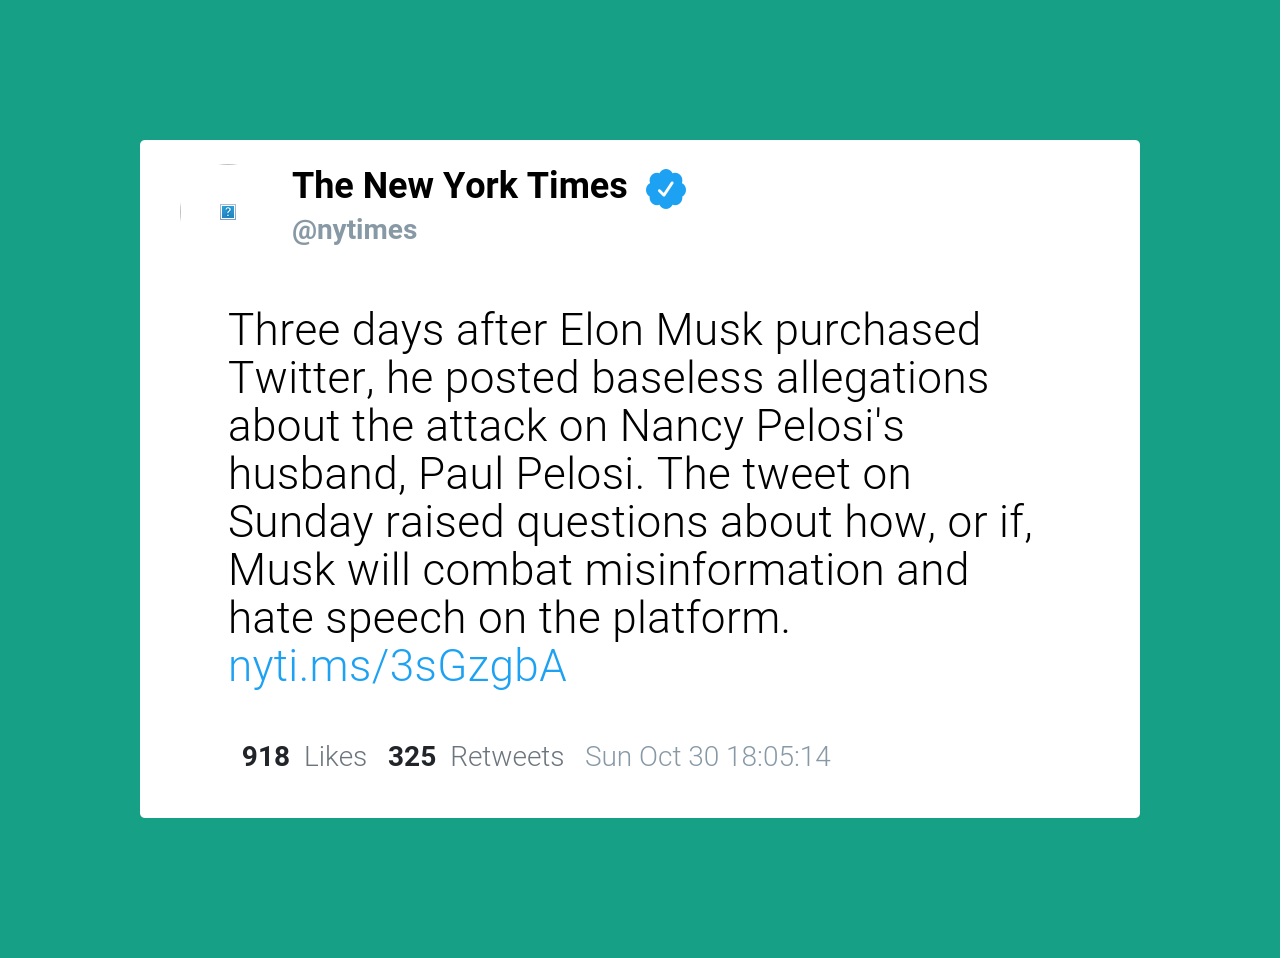 A tweet from the *New York Times* about Elon Musk spewing misinformation 